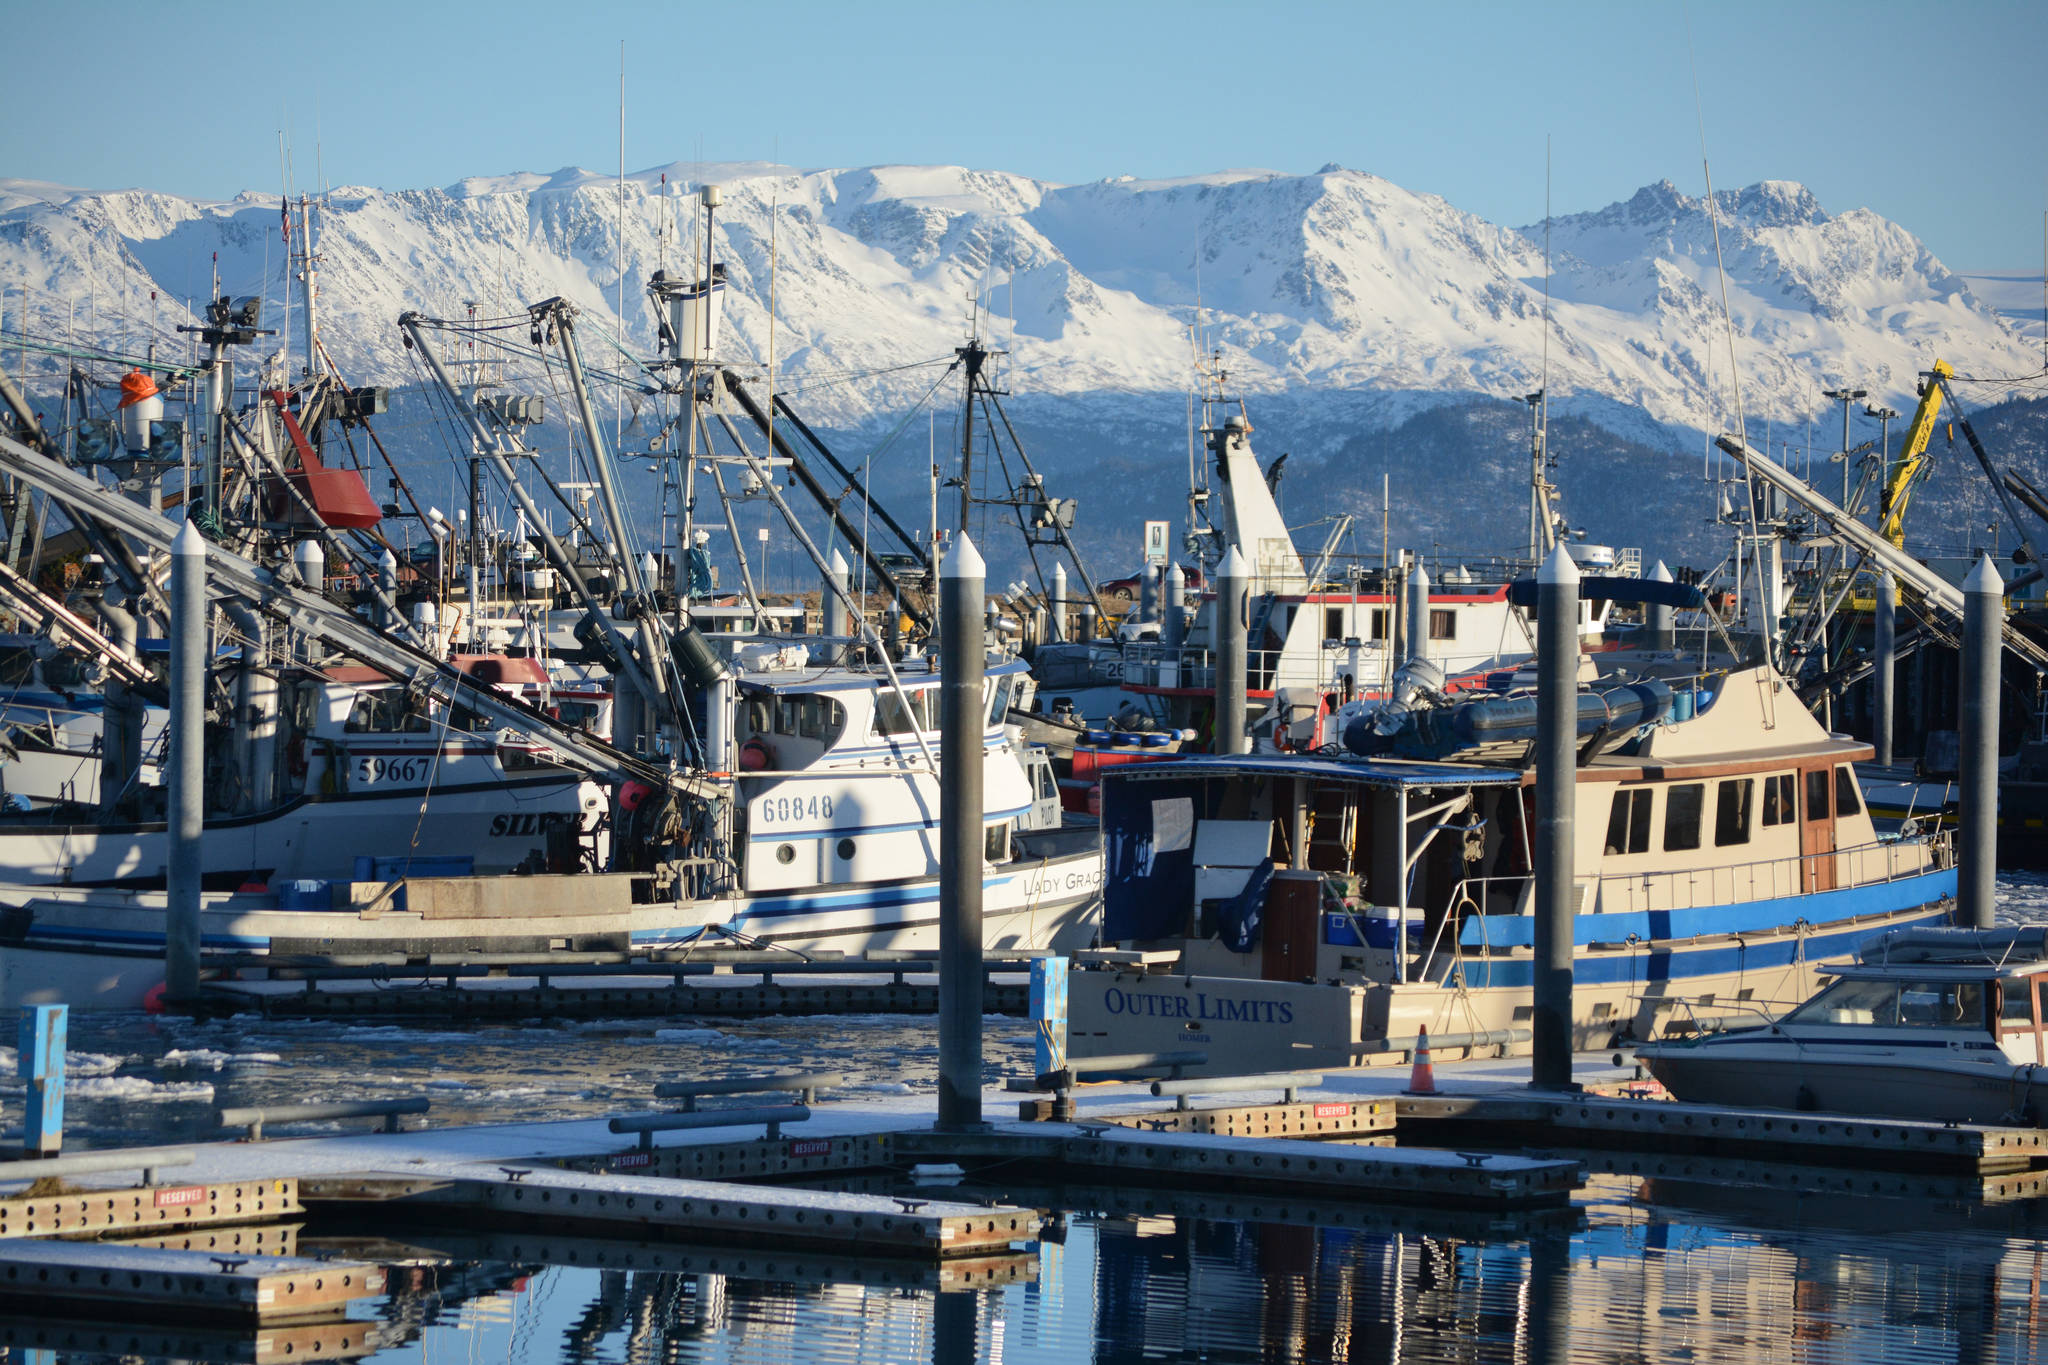 Seawatch: Some commercial fishermen critical of Dunleavy